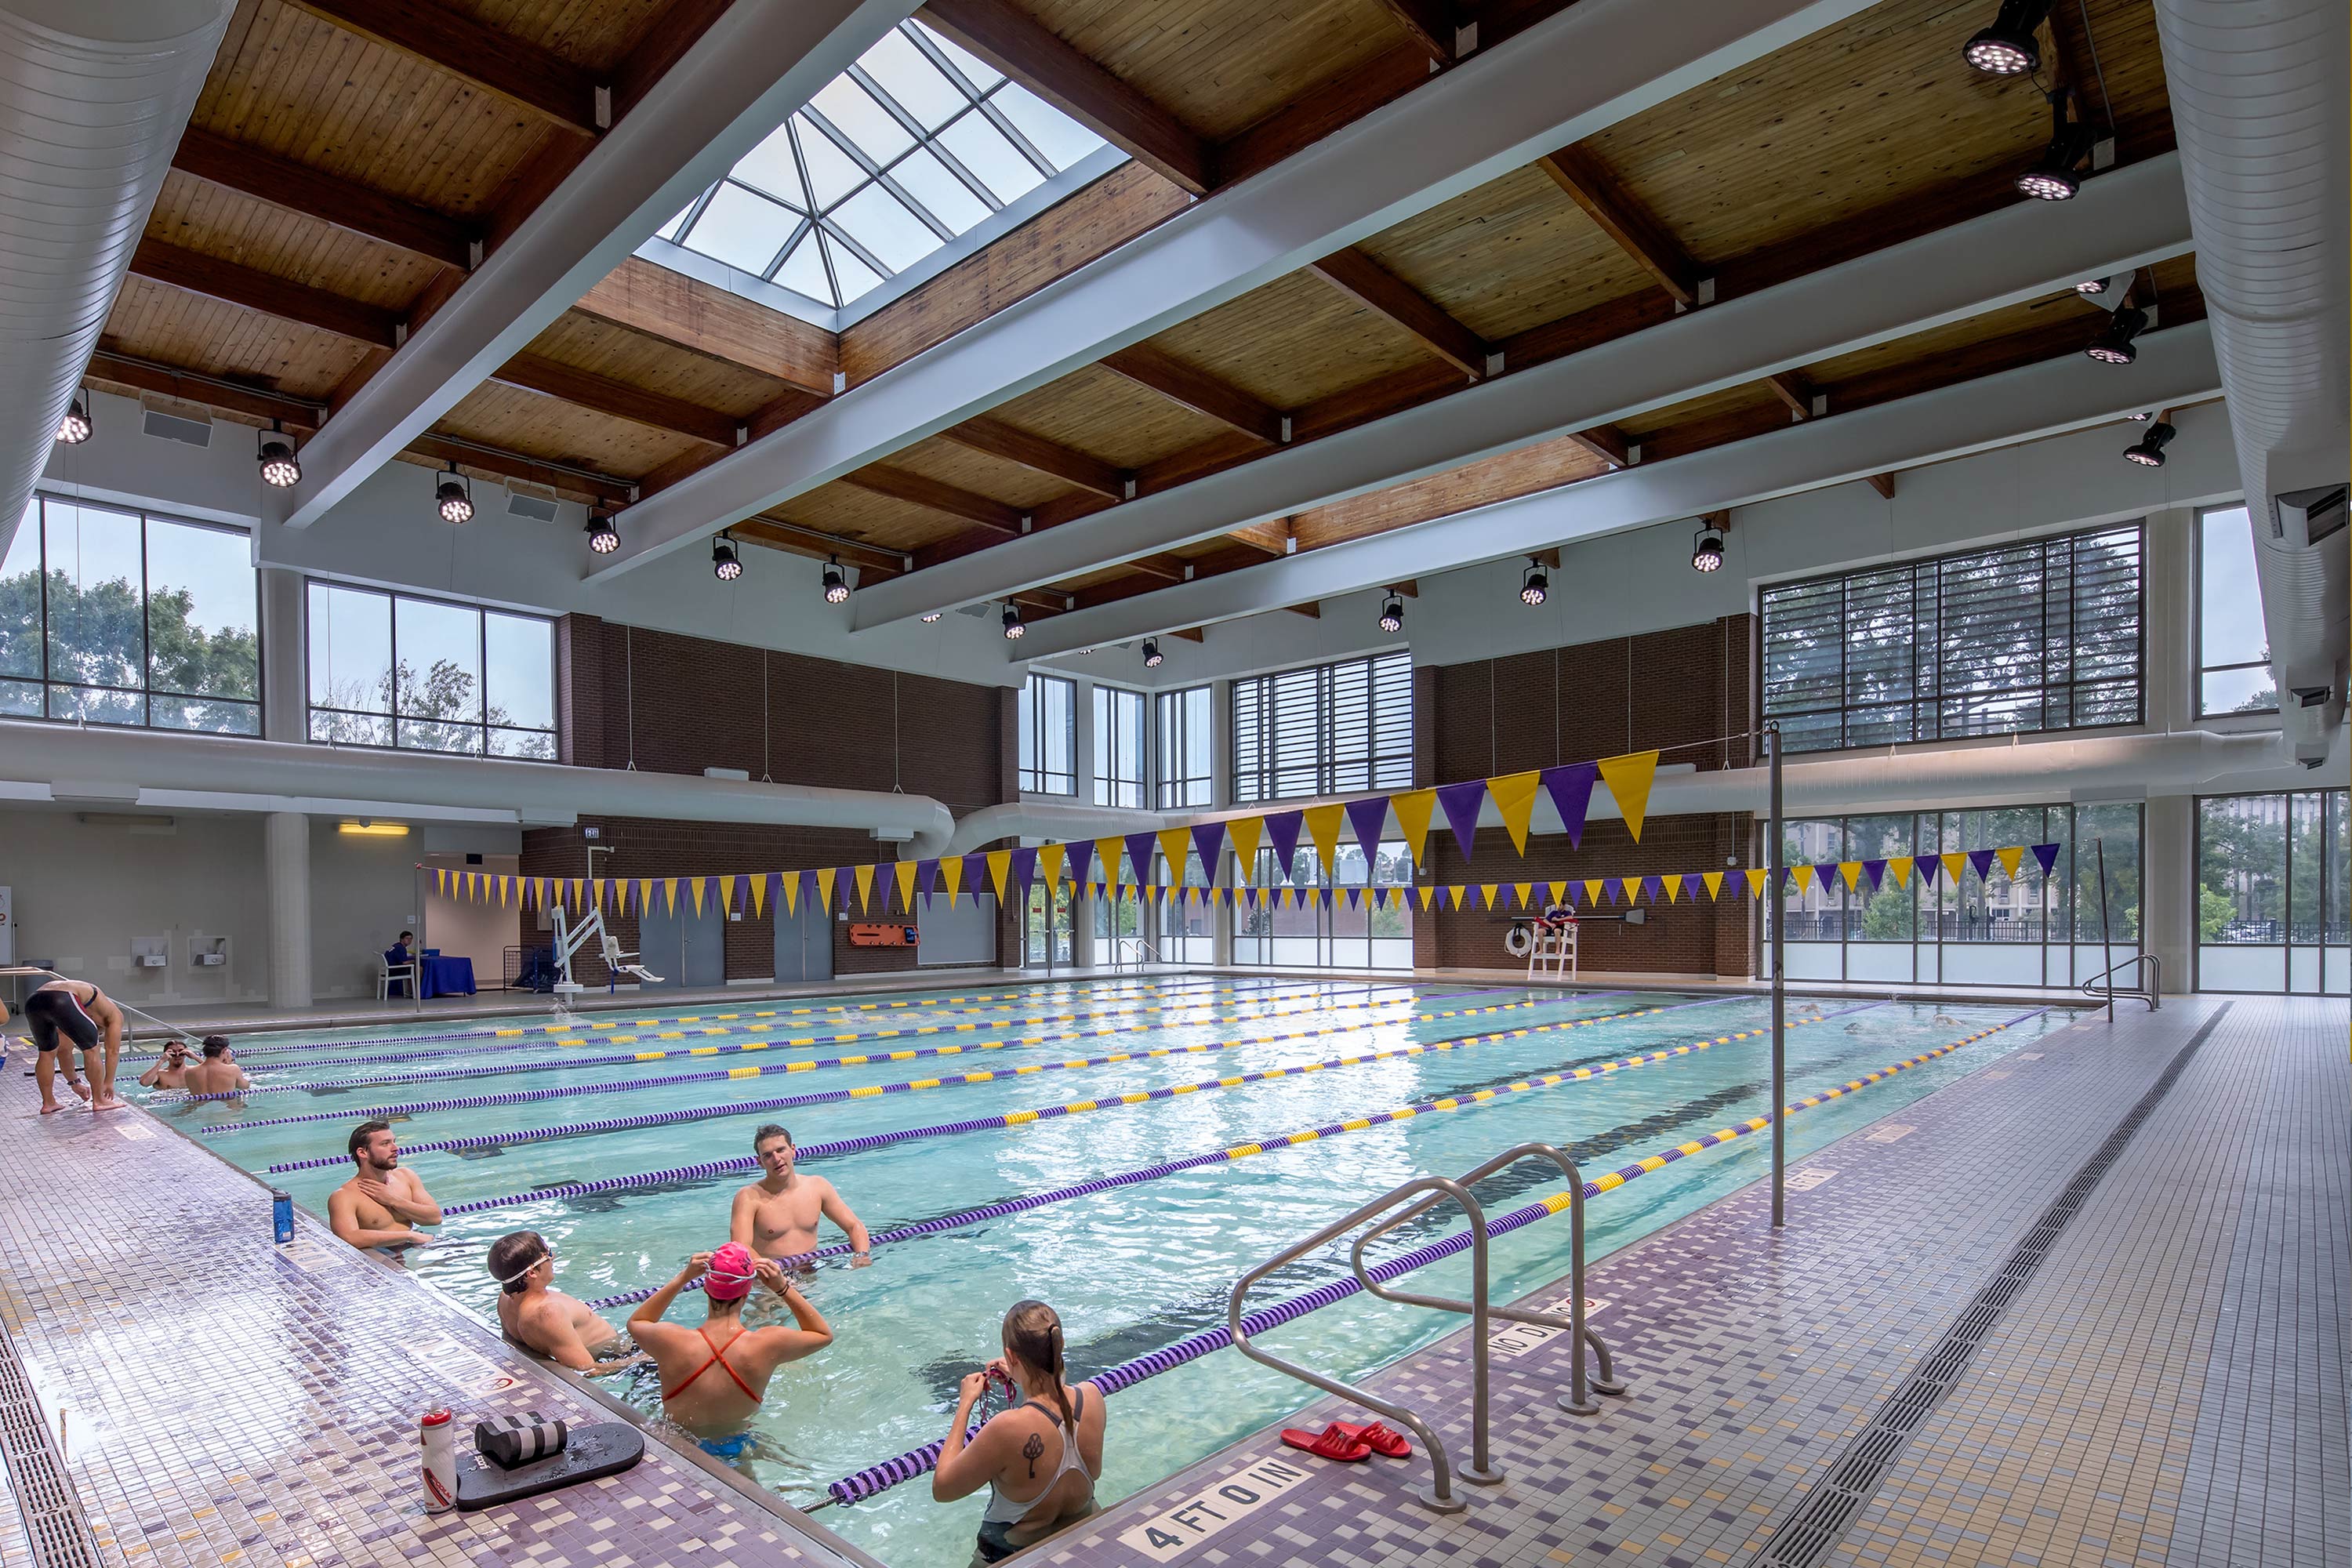 Indoor Pool area with swimmers in lanes